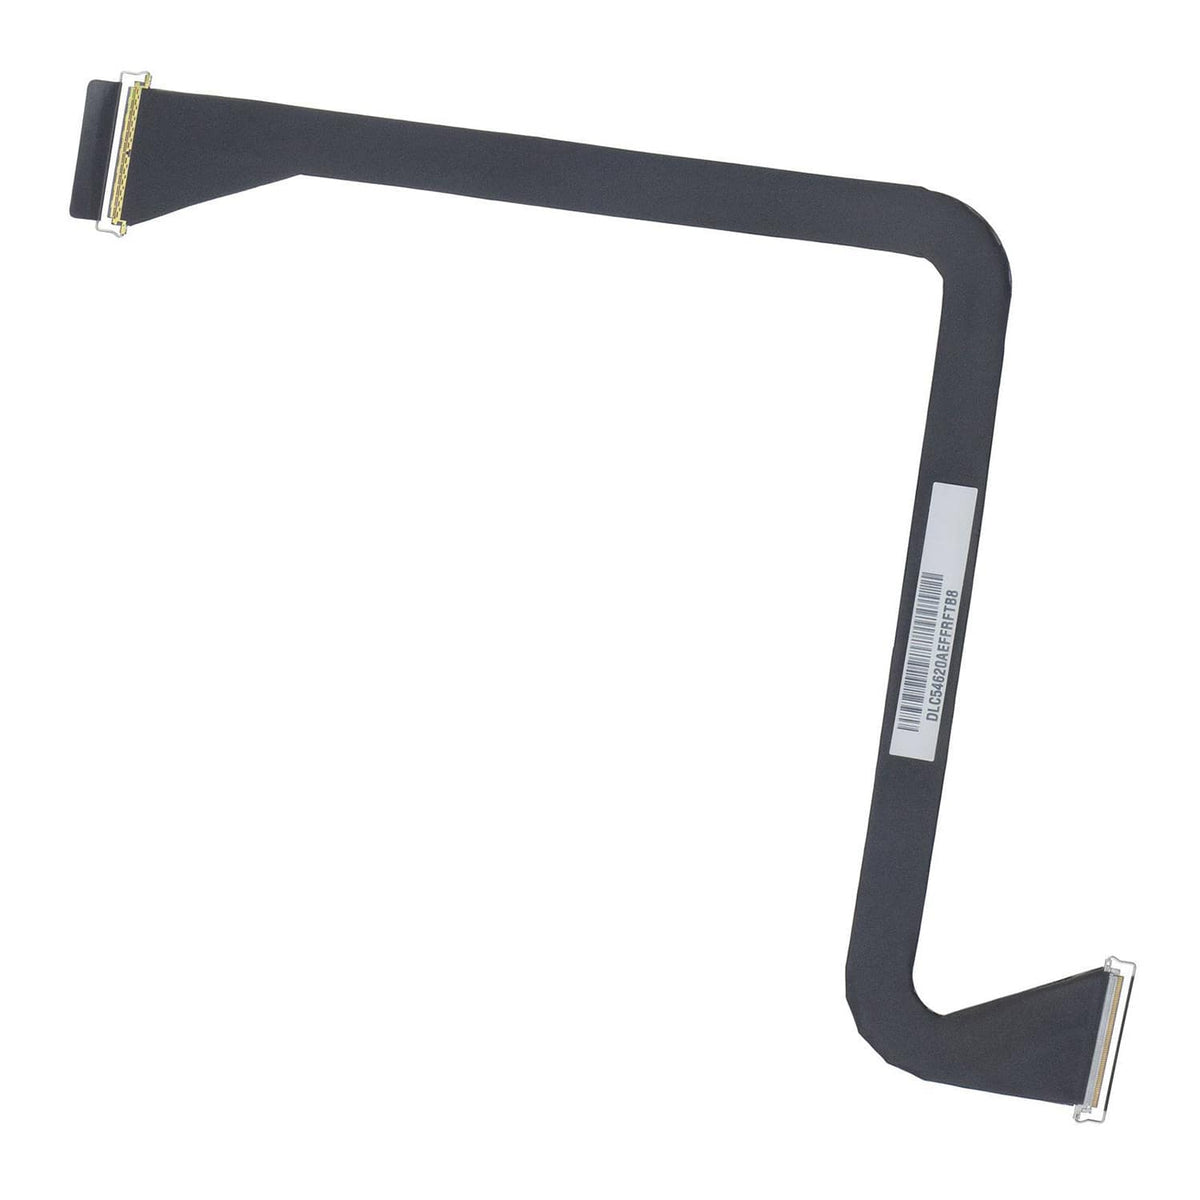 LCD DISPLAY EDP CABLE FOR IMAC 27" A1419/A2115 (MID 2017, EARLY 2019) 923-01668